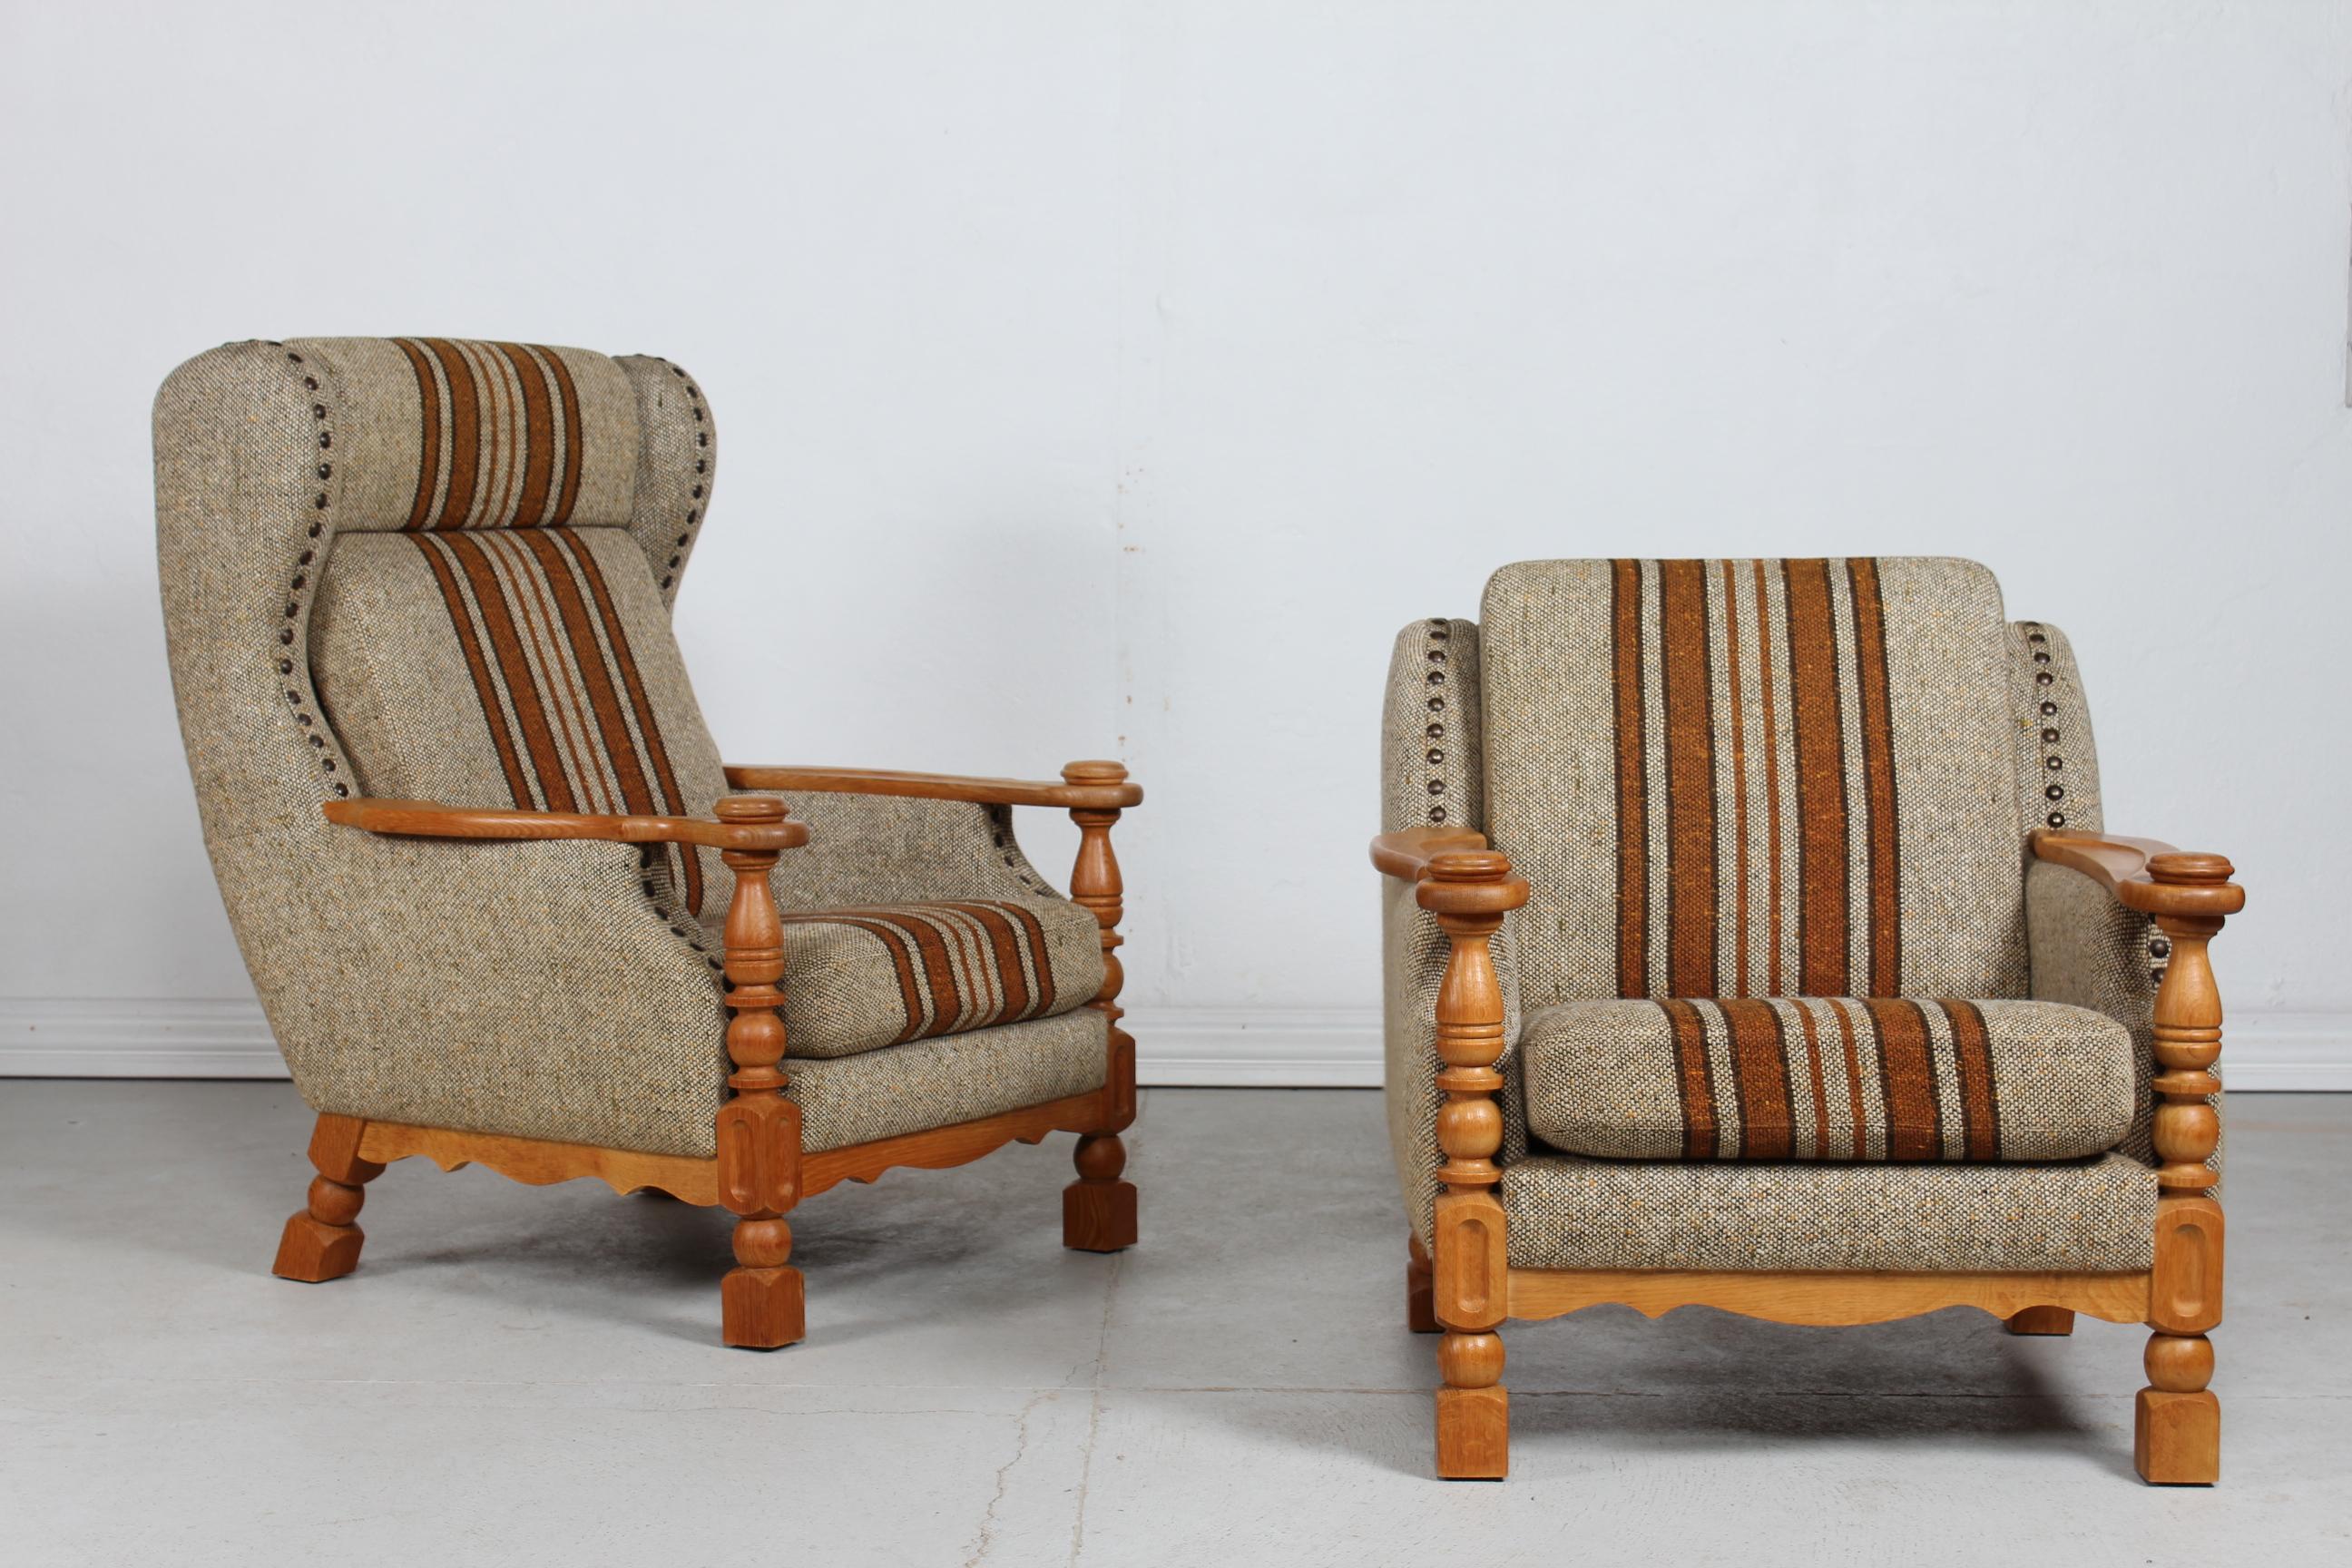 A stunning set of two danish vintage lounge chairs size King and Queen
They are most likely designed by Henning Kjærnulf and manufactured in Denmark by EG Møbler
The set has frames and armrests of turned and carved solid oak upholstered with the